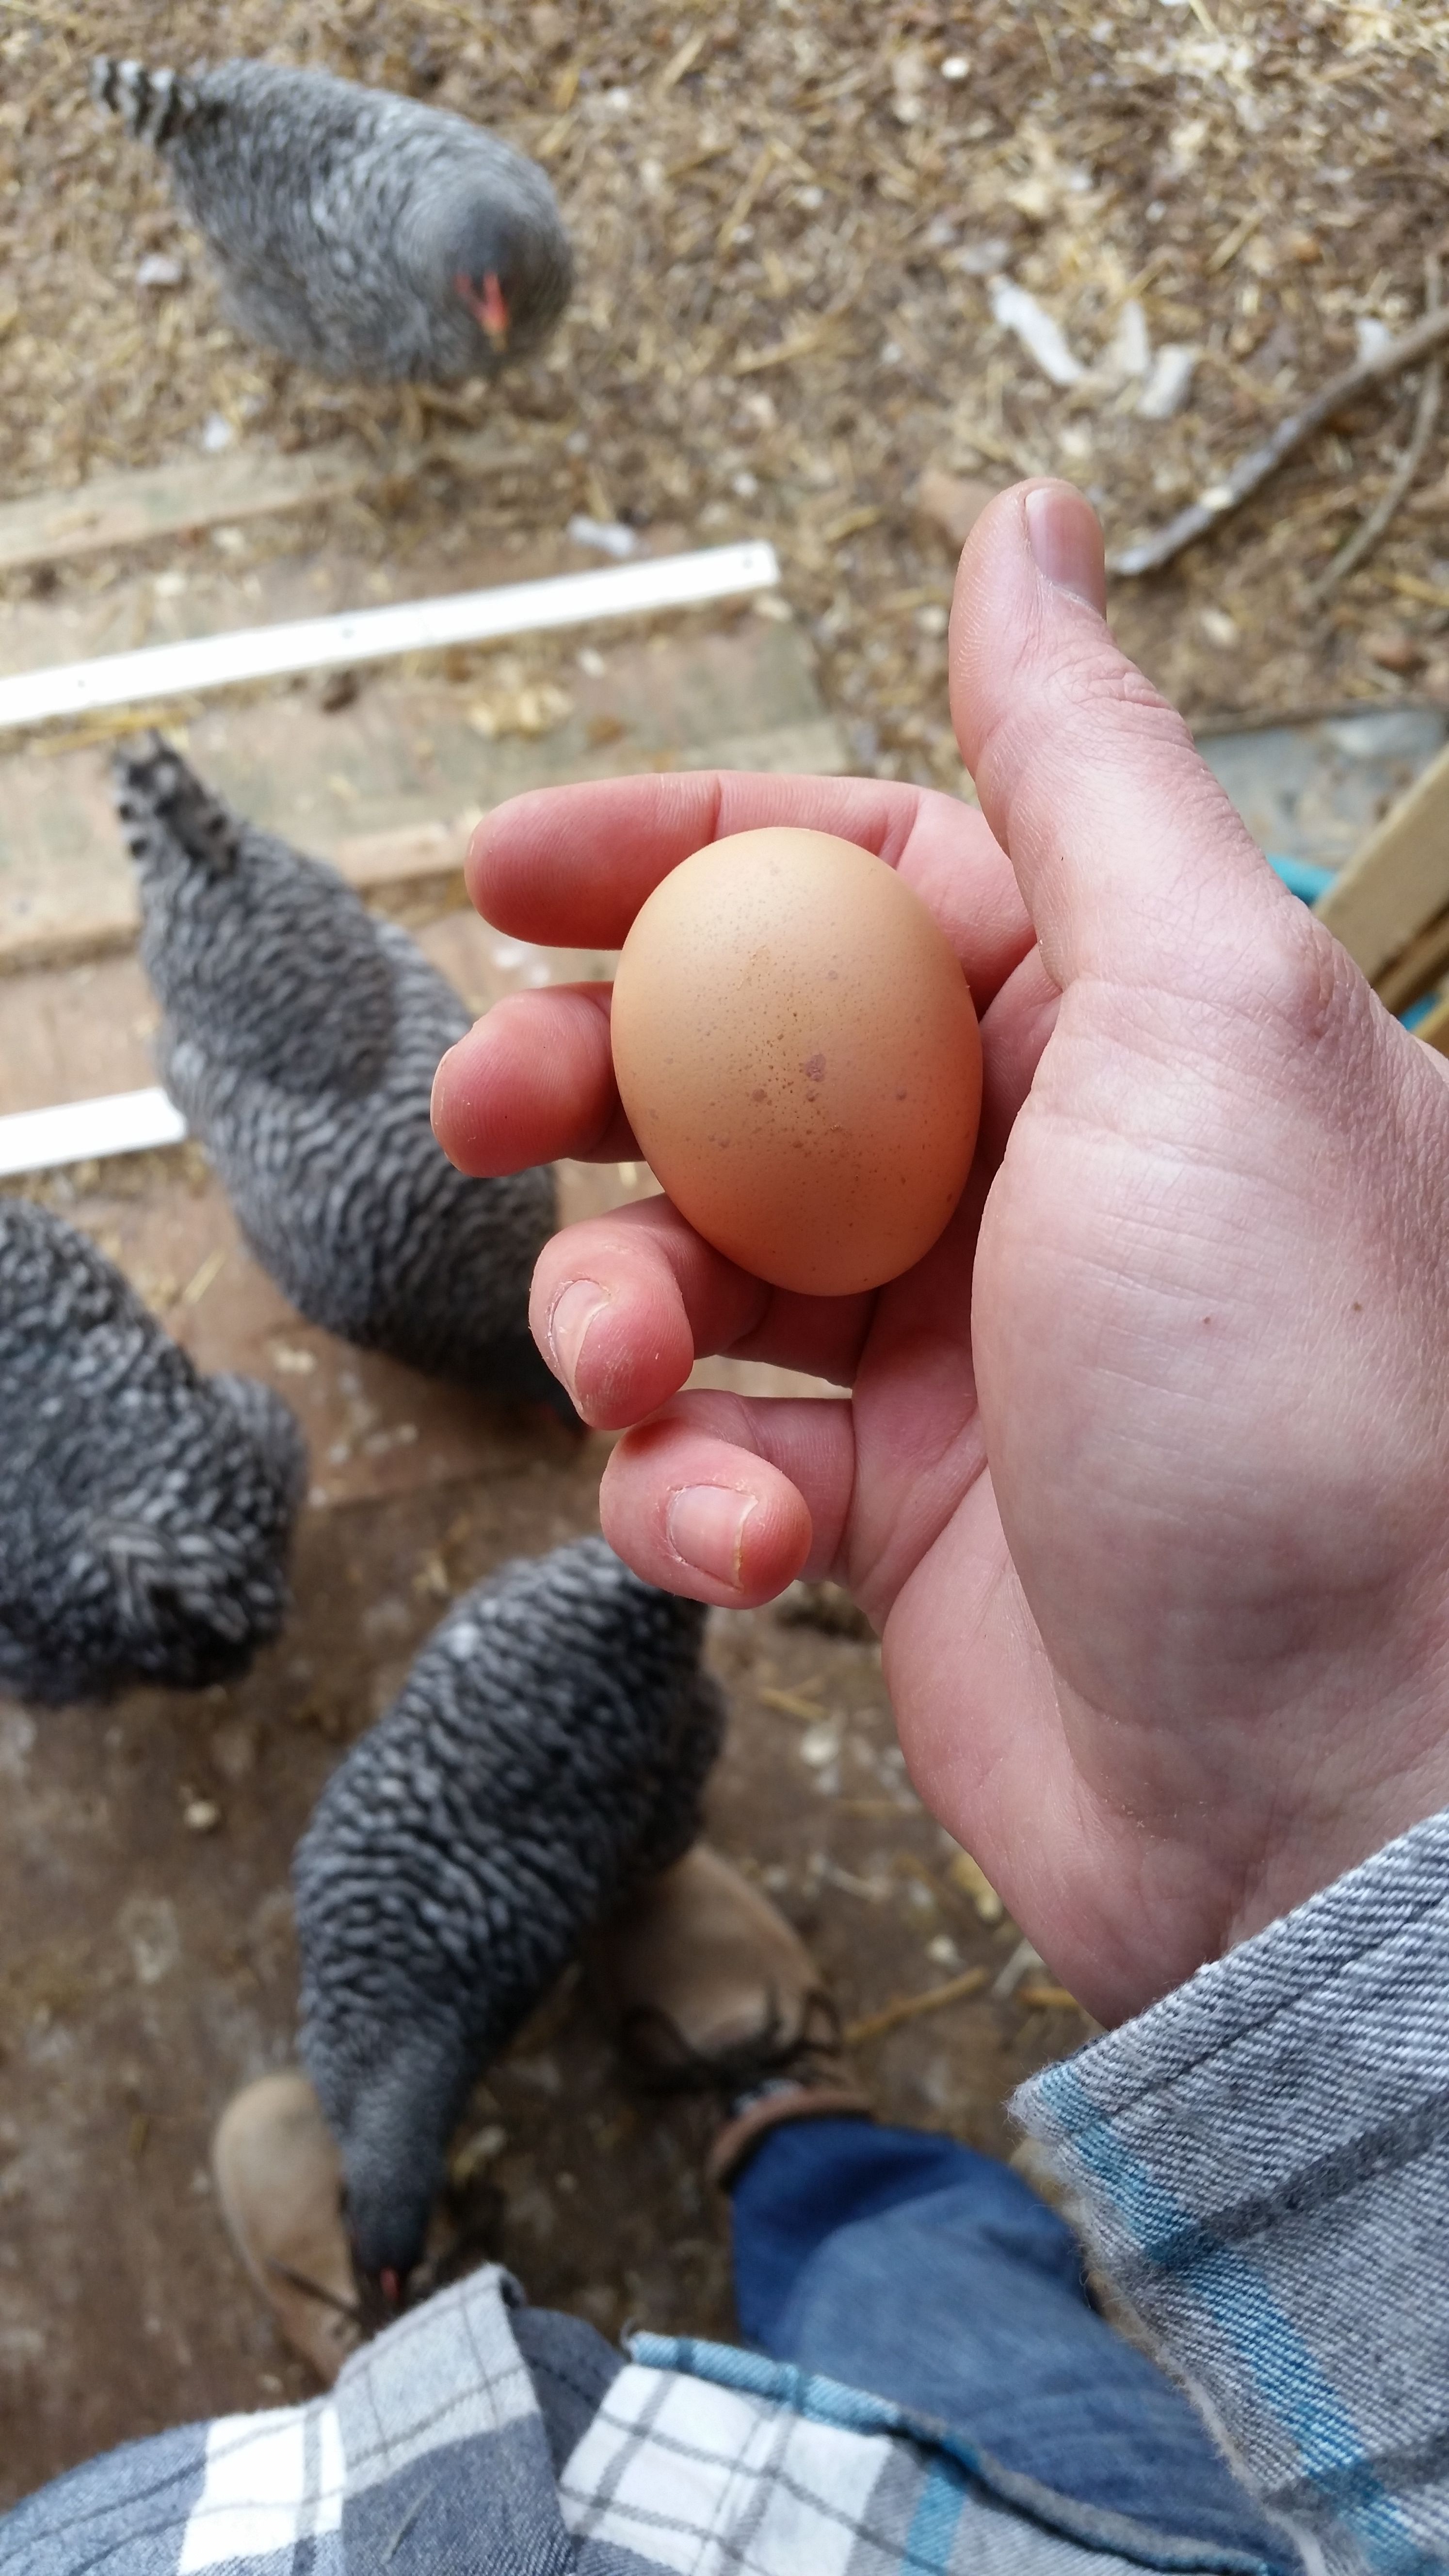 Our Barred Rocks laid their first egg!